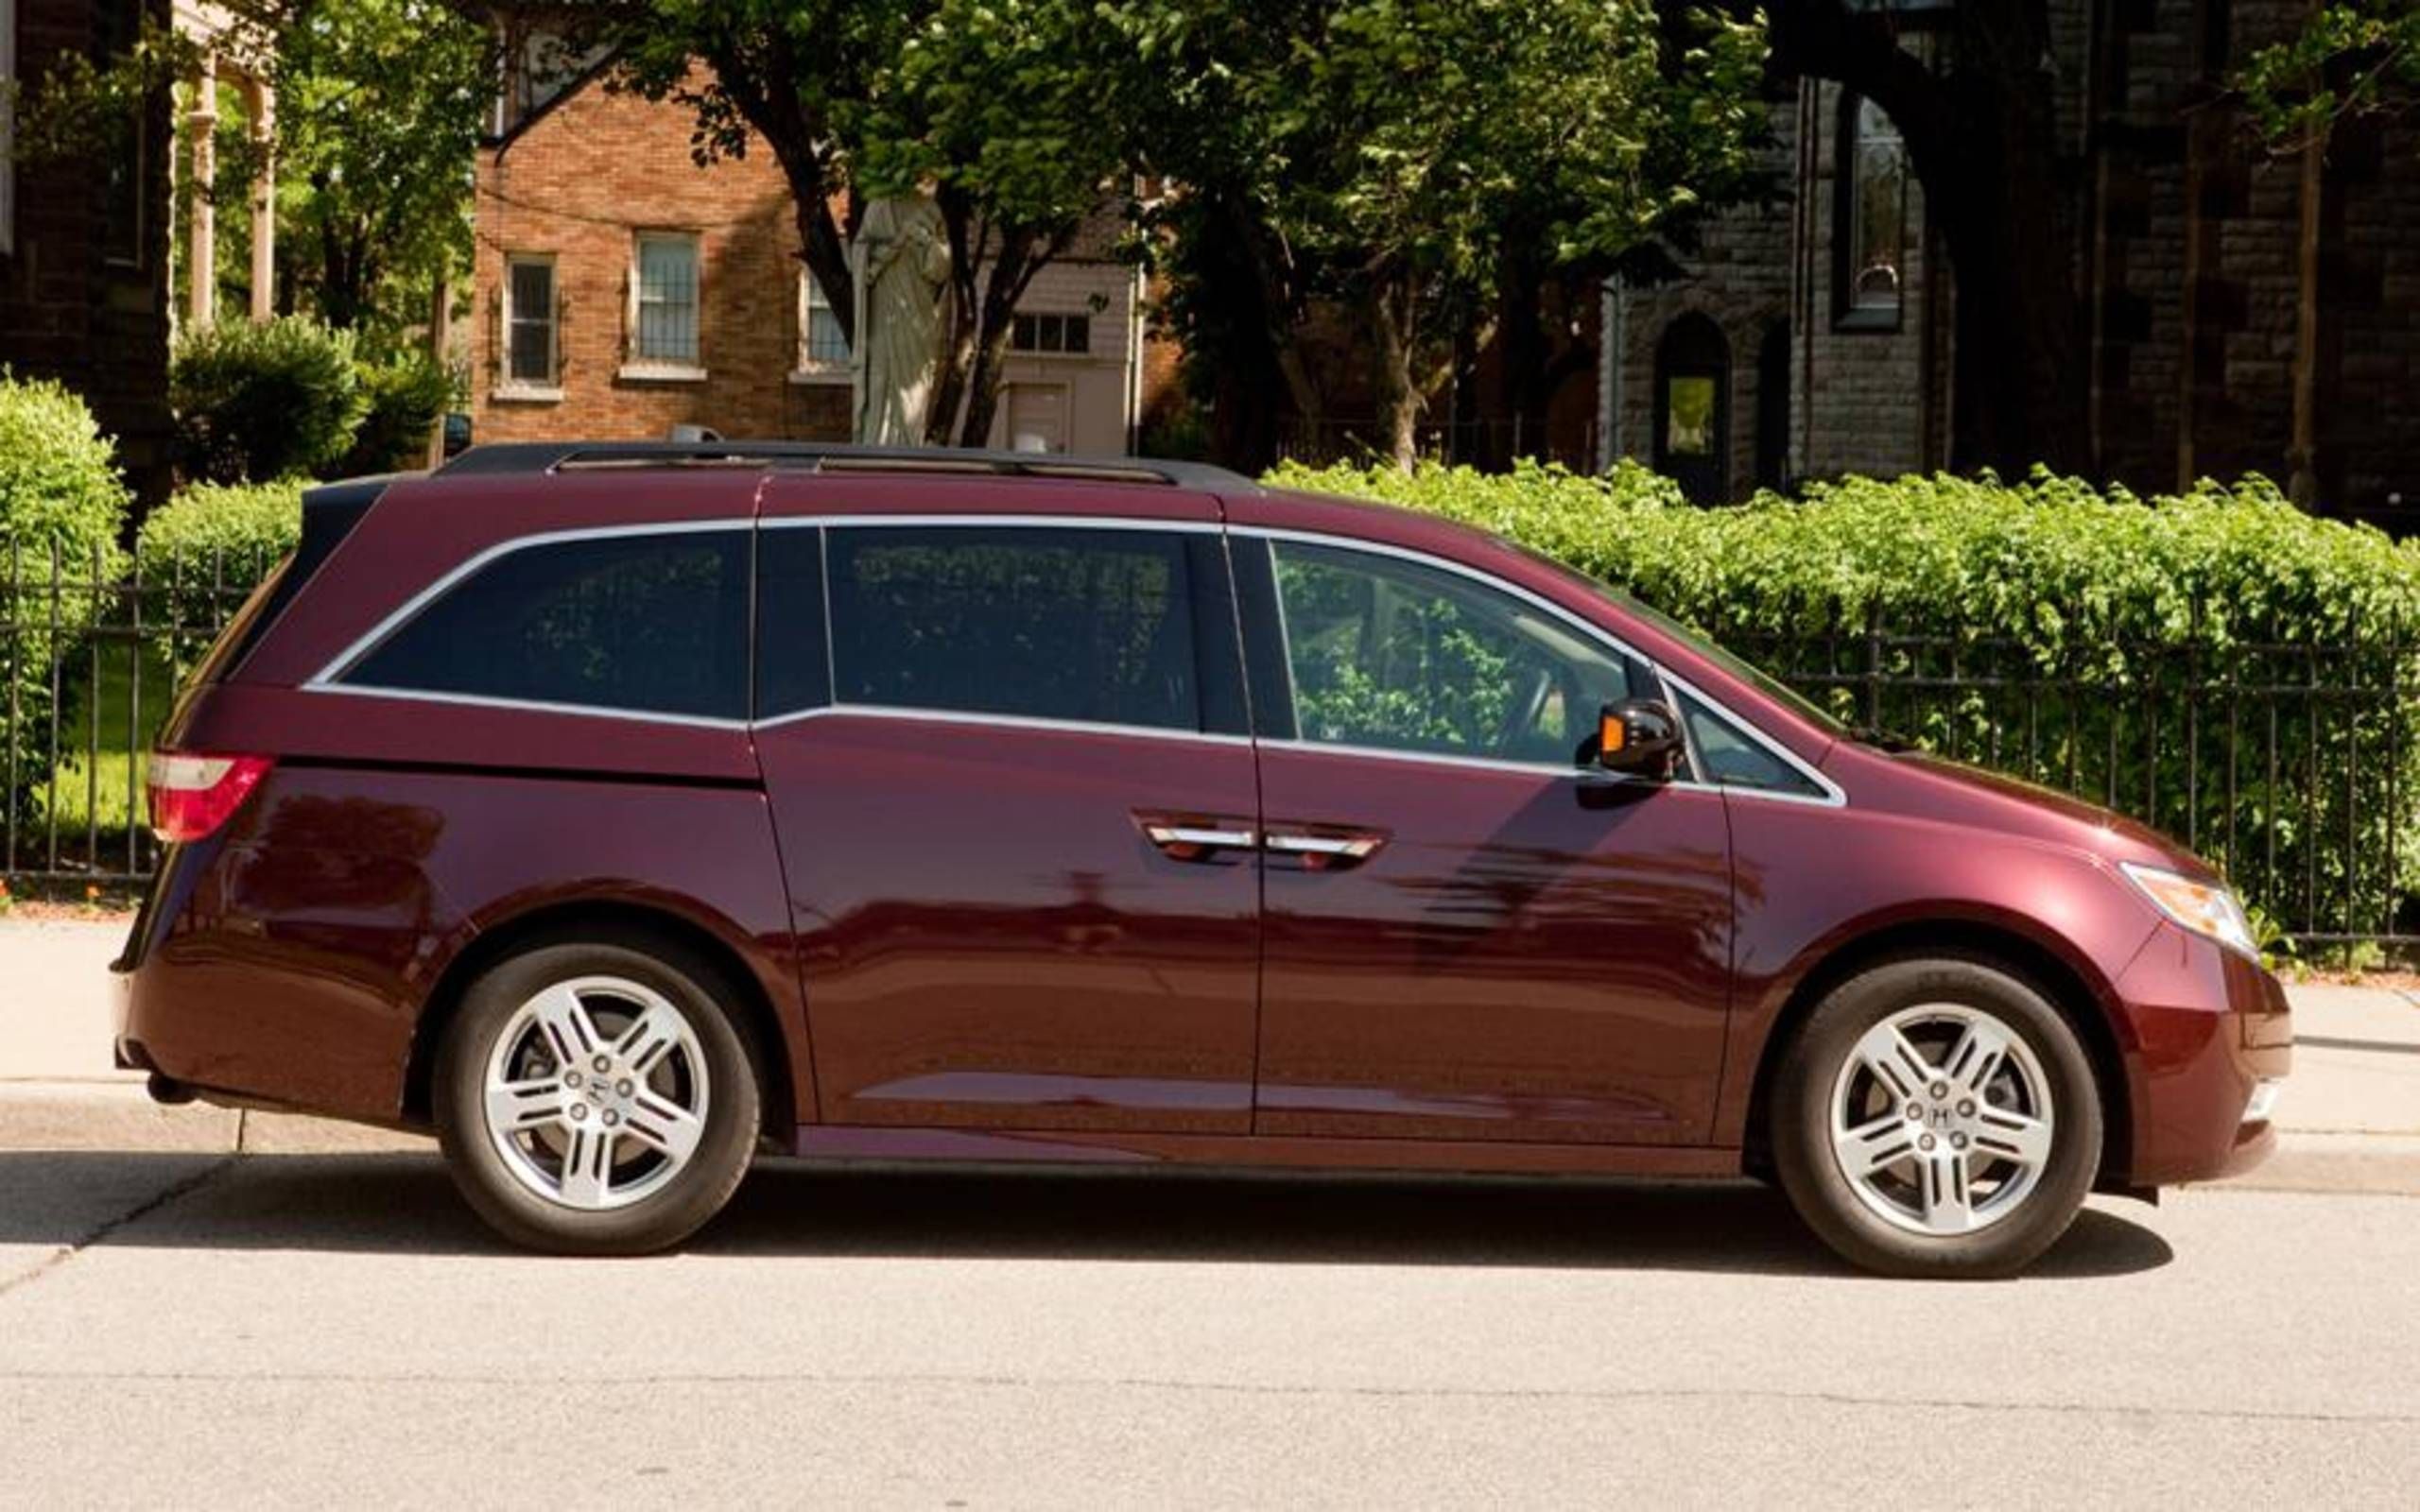 2011 Honda Odyssey Touring Elite: Long-term car review: Three months with  the Honda Odyssey brings lots of smiles